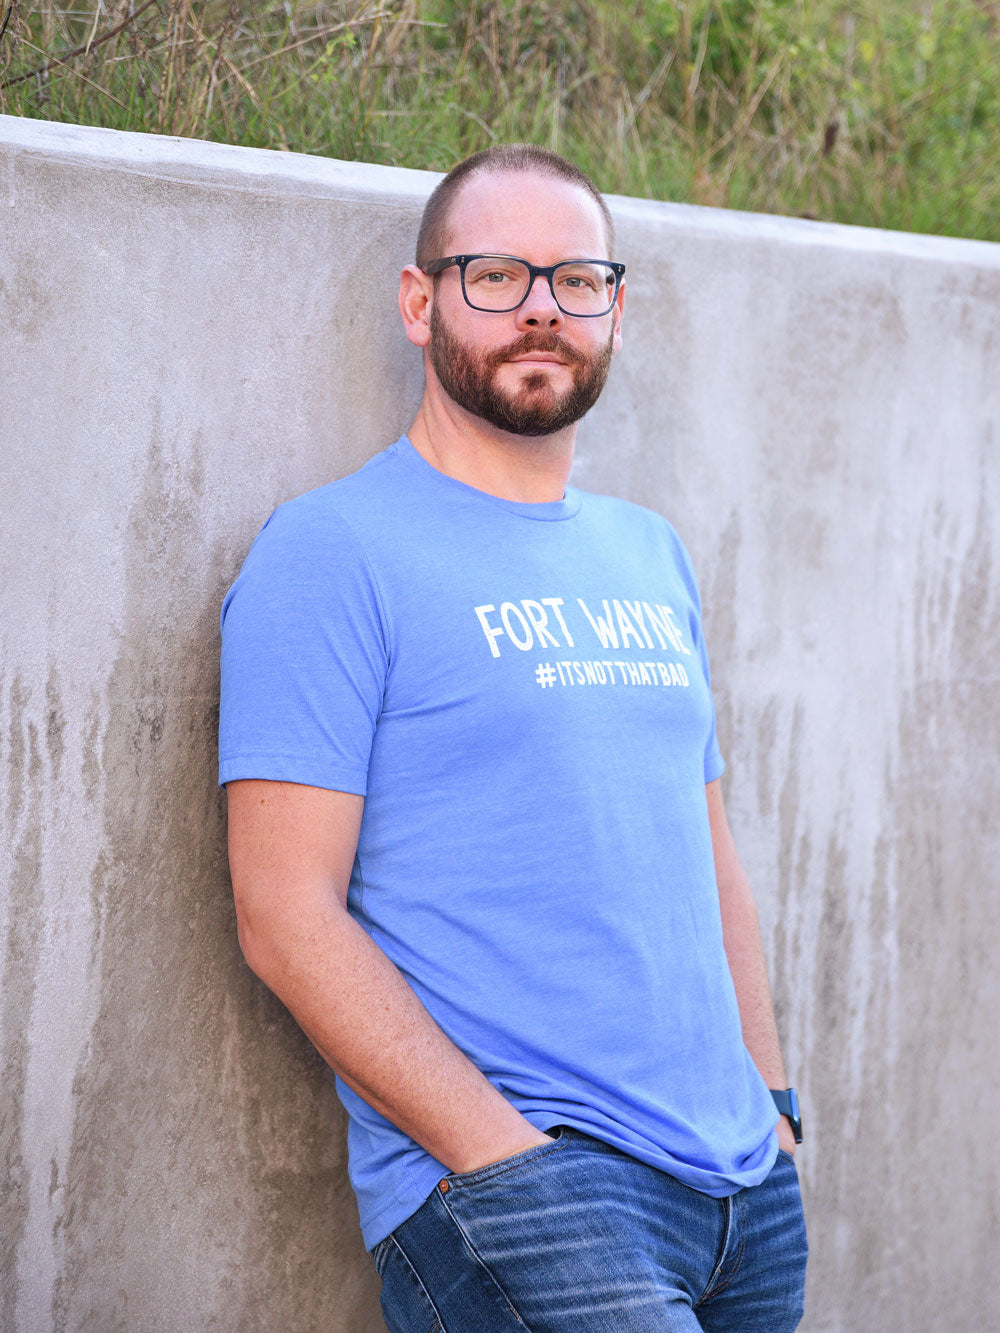 Fort Wayne #itsnotthatbad blue heather t-shirt on model by concrete wall